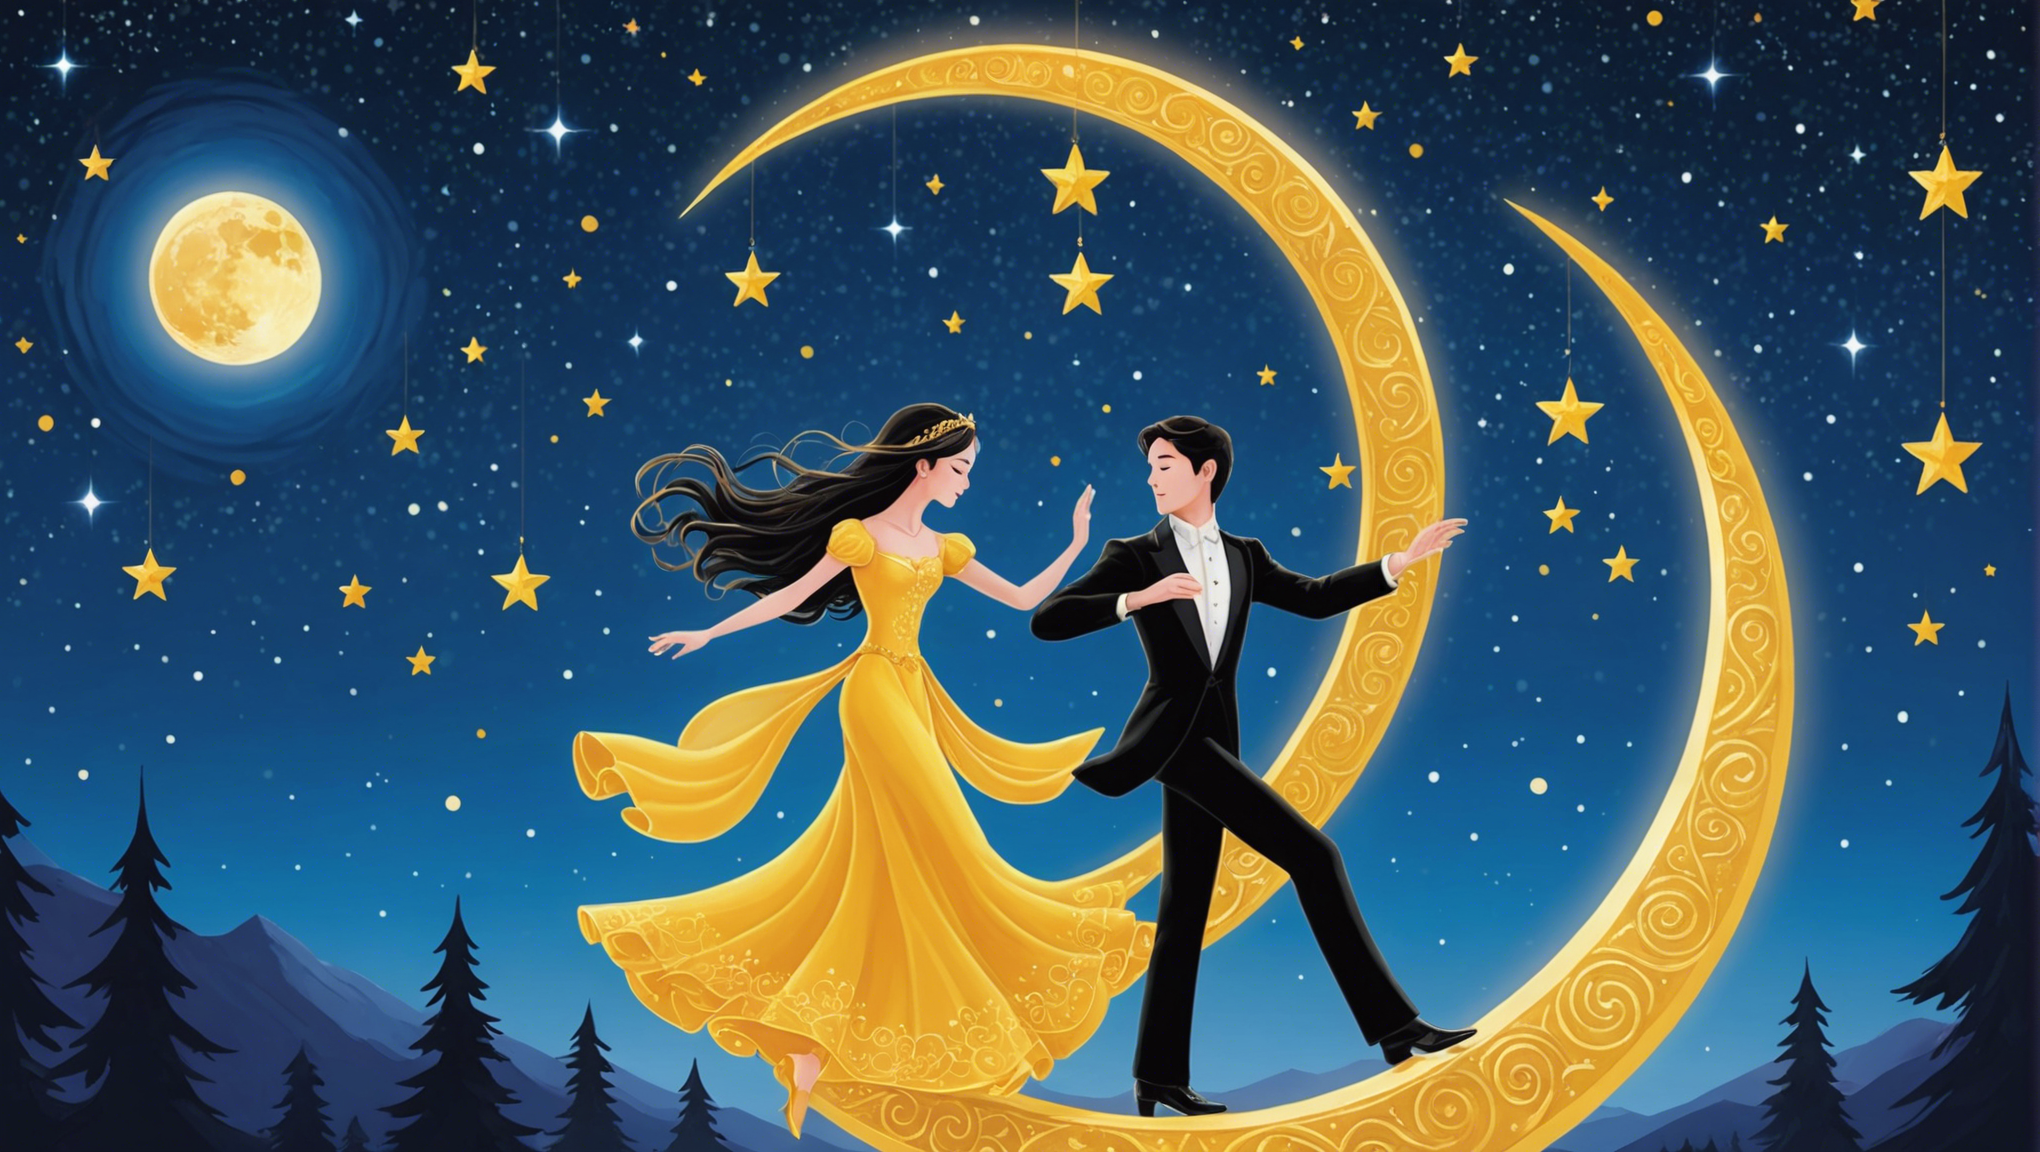 discover the mesmerizing secrets hidden in the celestial ballet of the star moon's enchanting dance and unlock the wisdom of the cosmos.